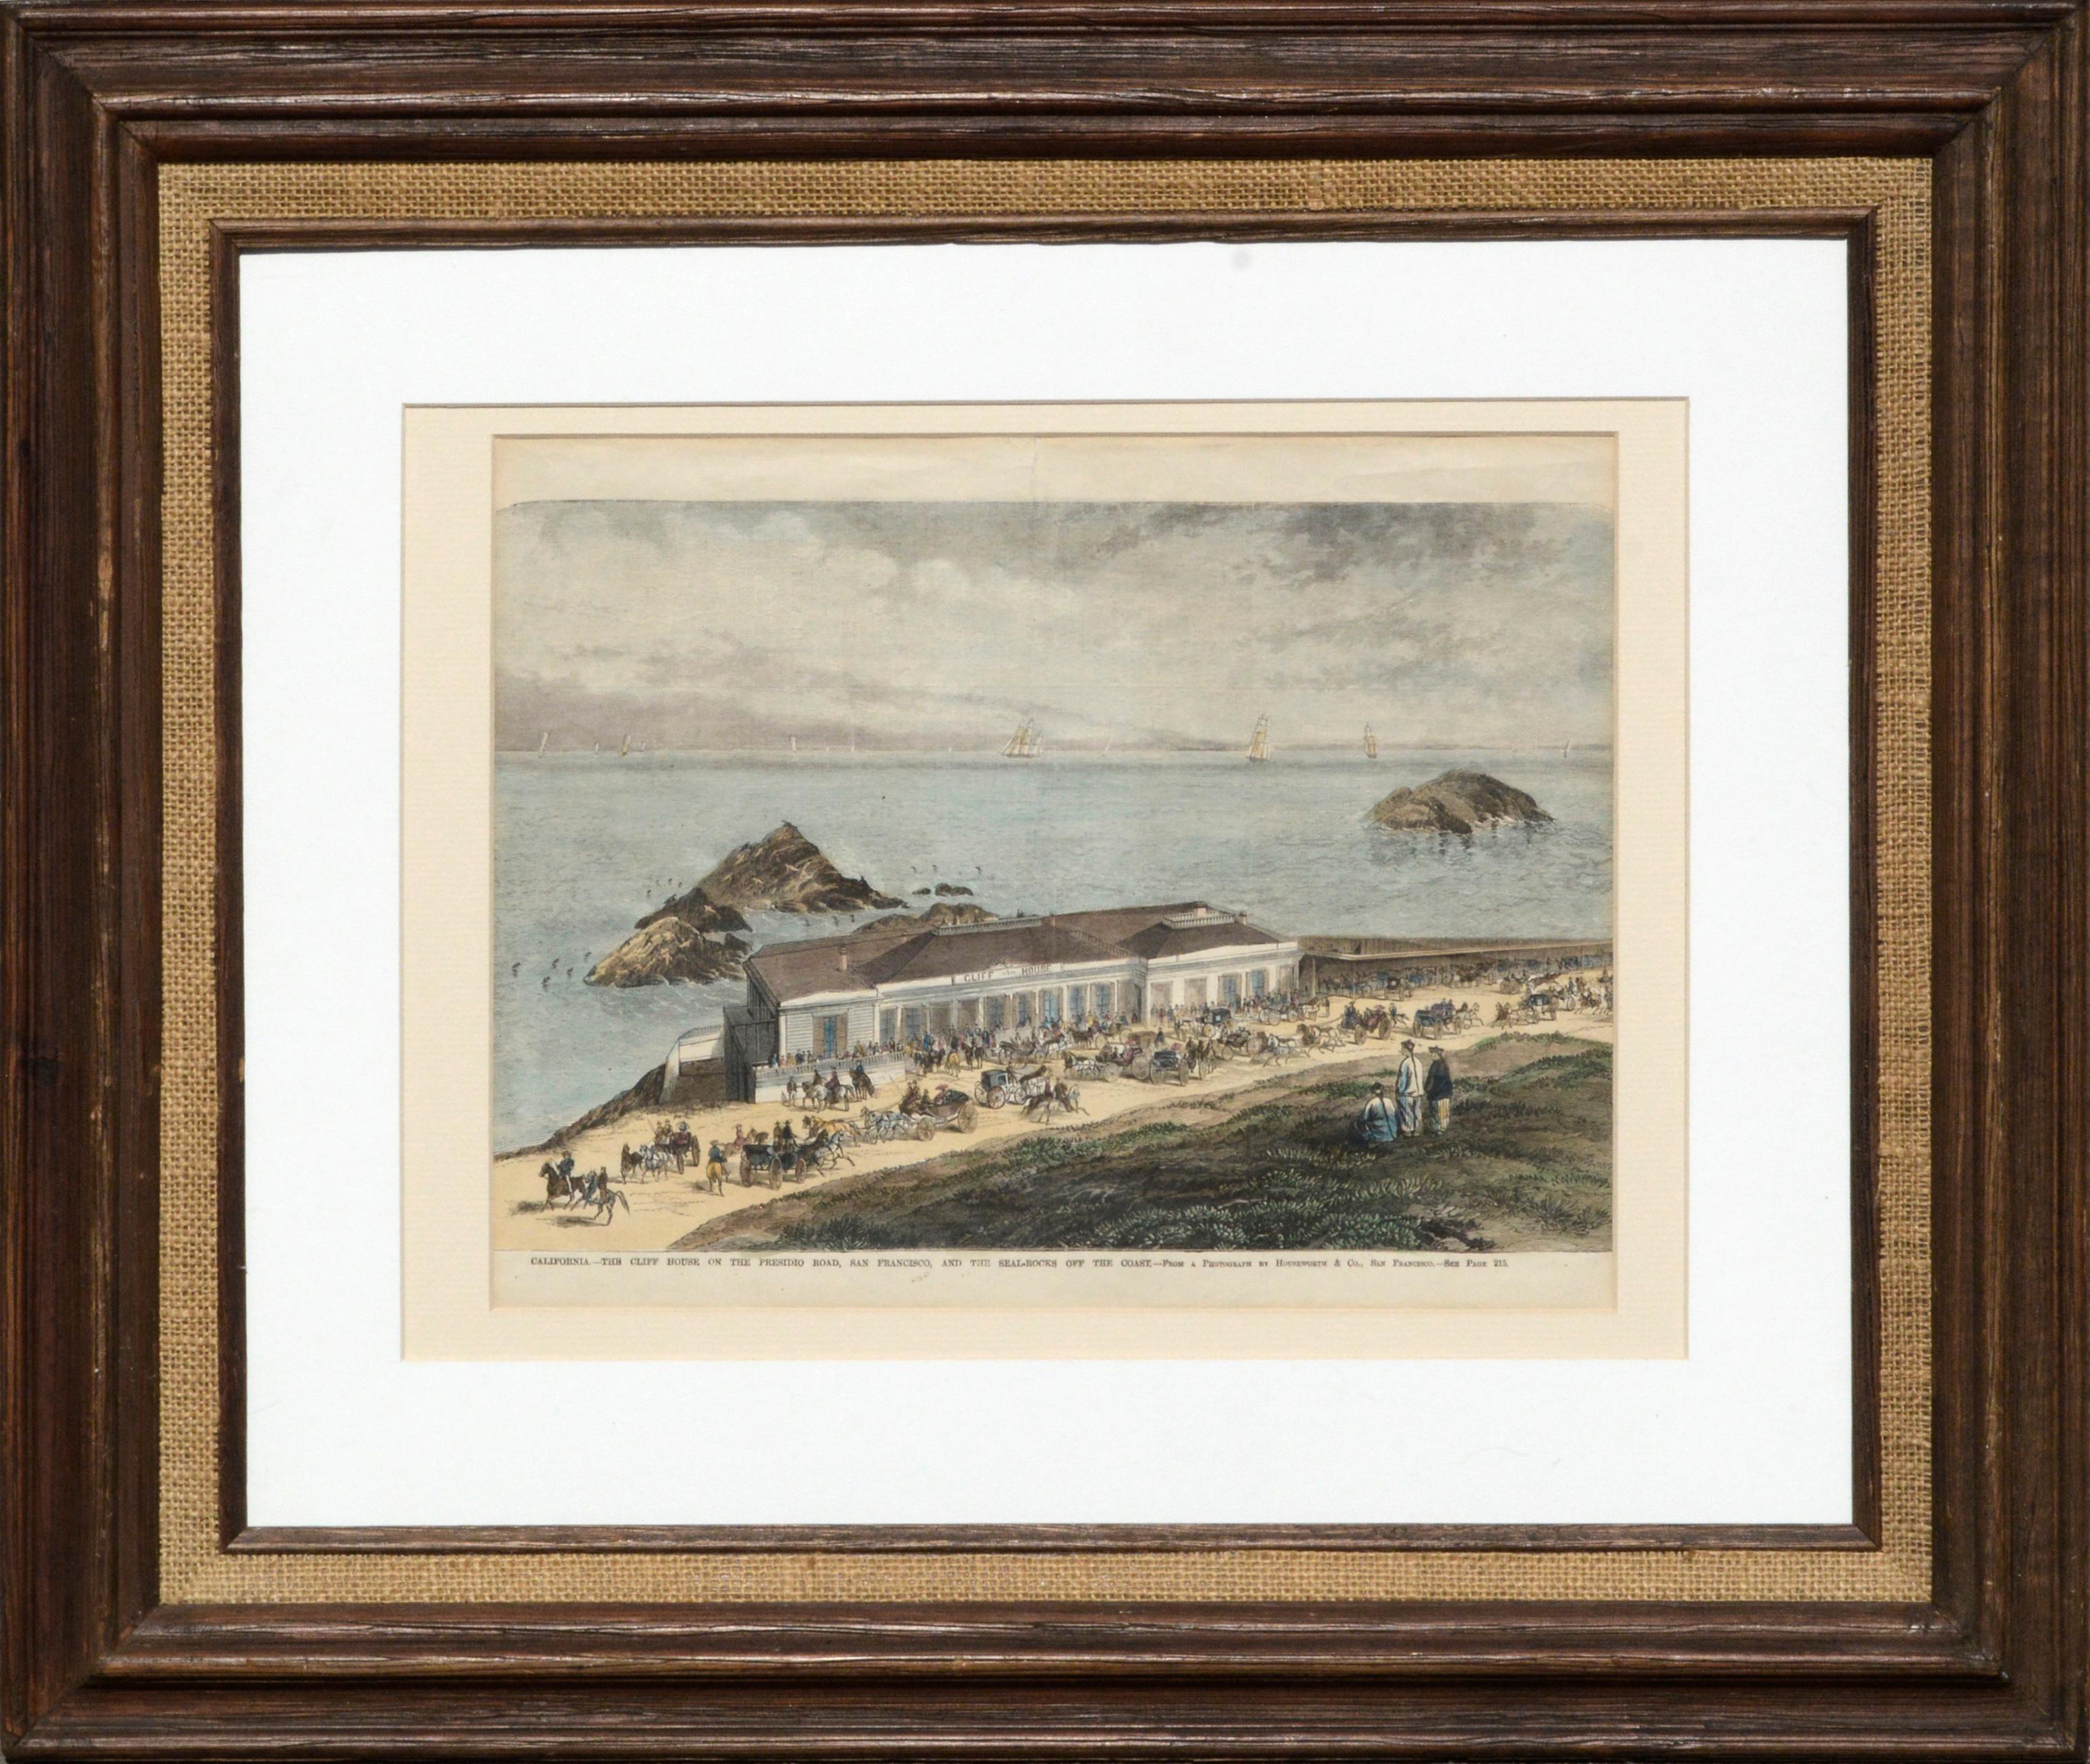 Houseworth Landscape Art - The Cliff House, San Francisco - Hand Colored Engraving